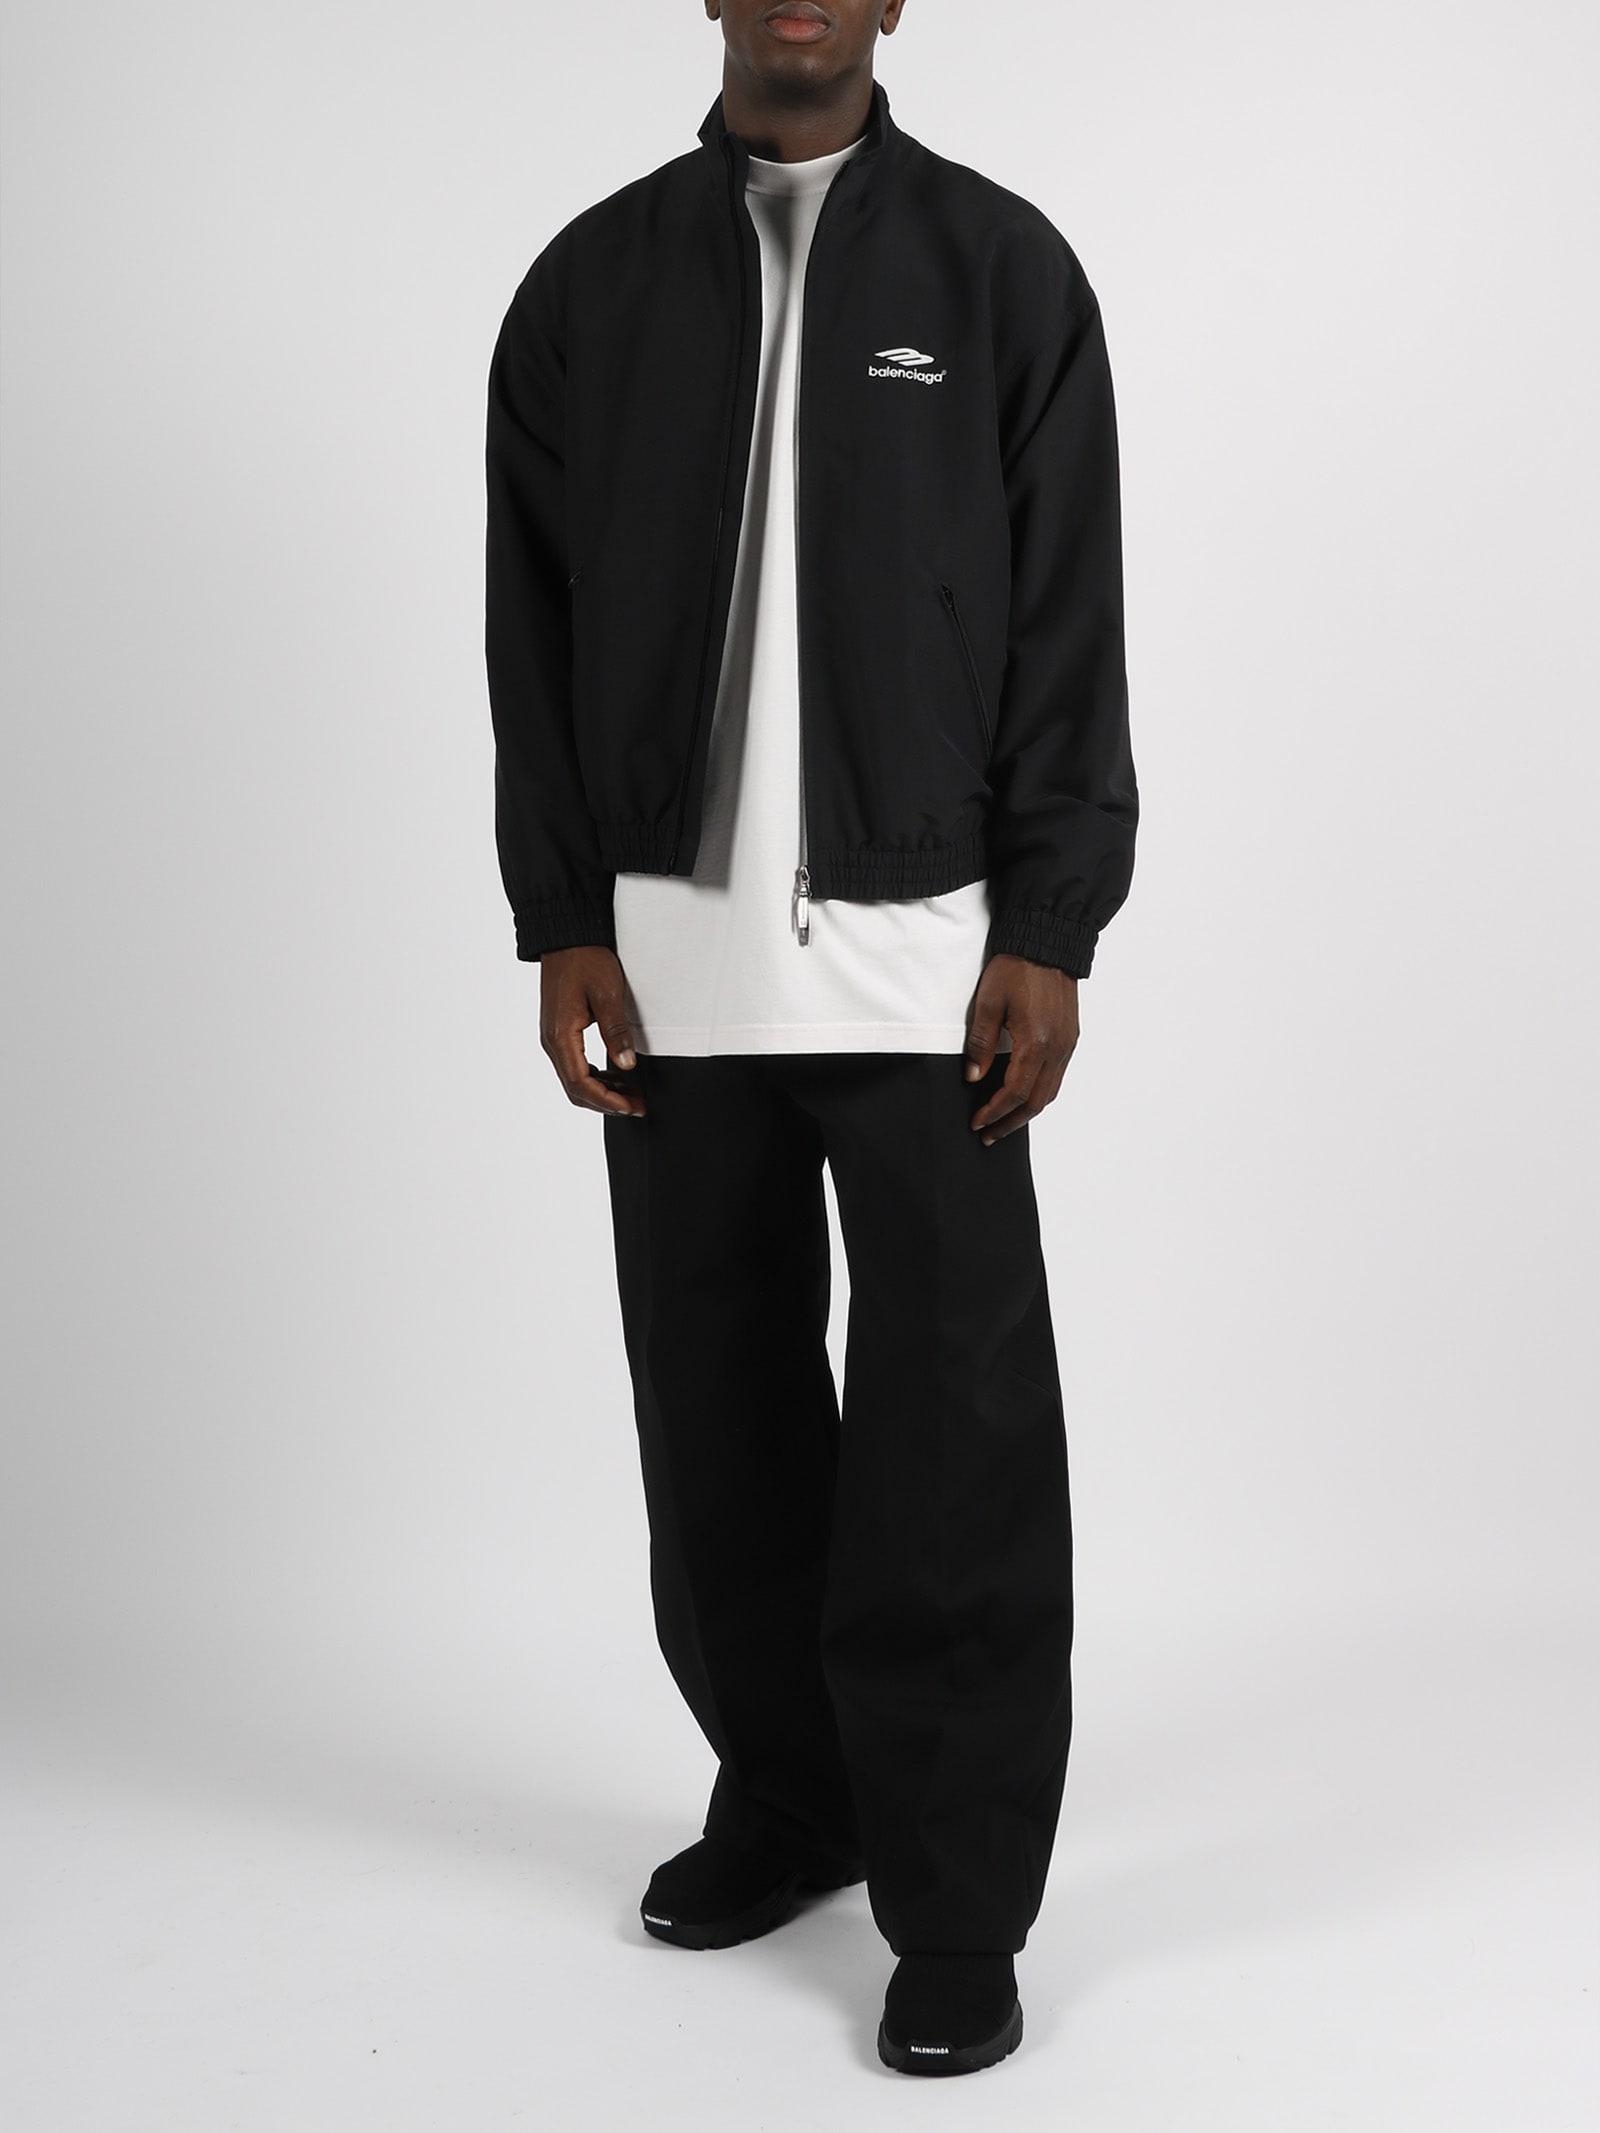 3b Sports Icon Tracksuit Jacket in Black